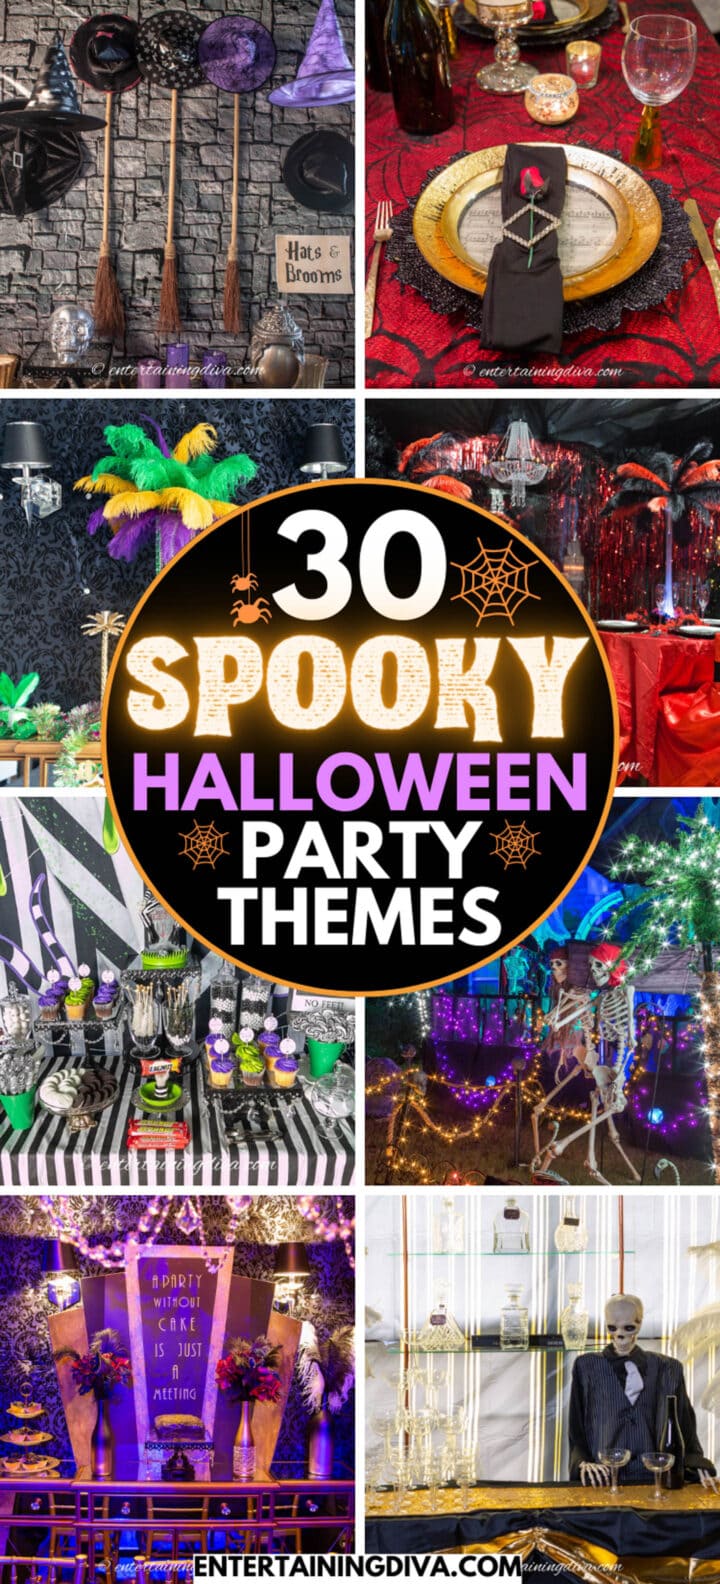 30 spooky halloween party themes for adults.